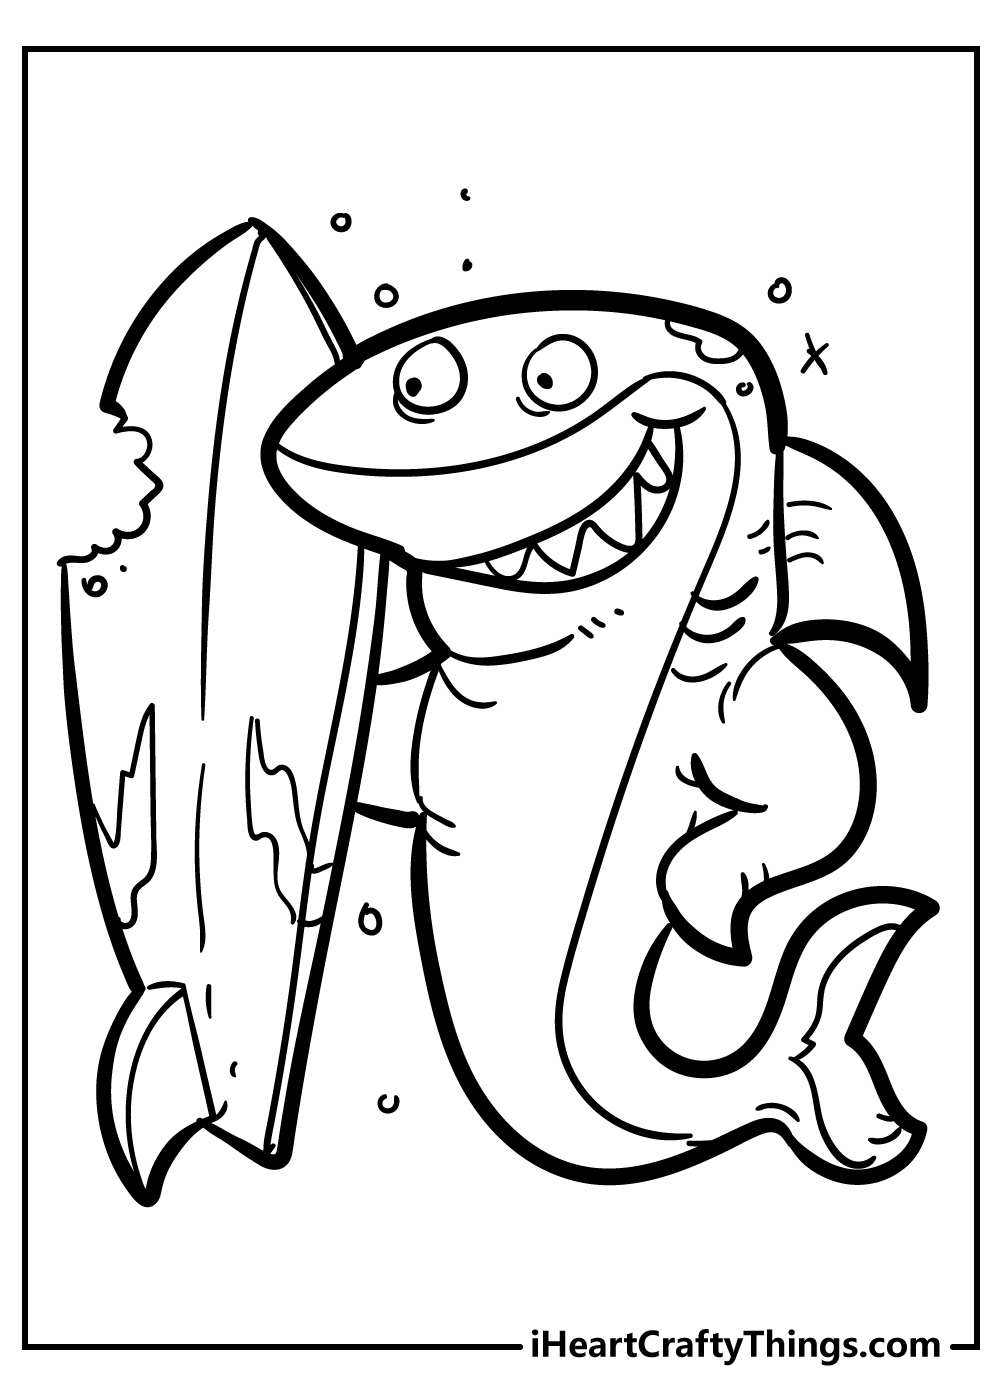 Shark coloring book for kids free printable